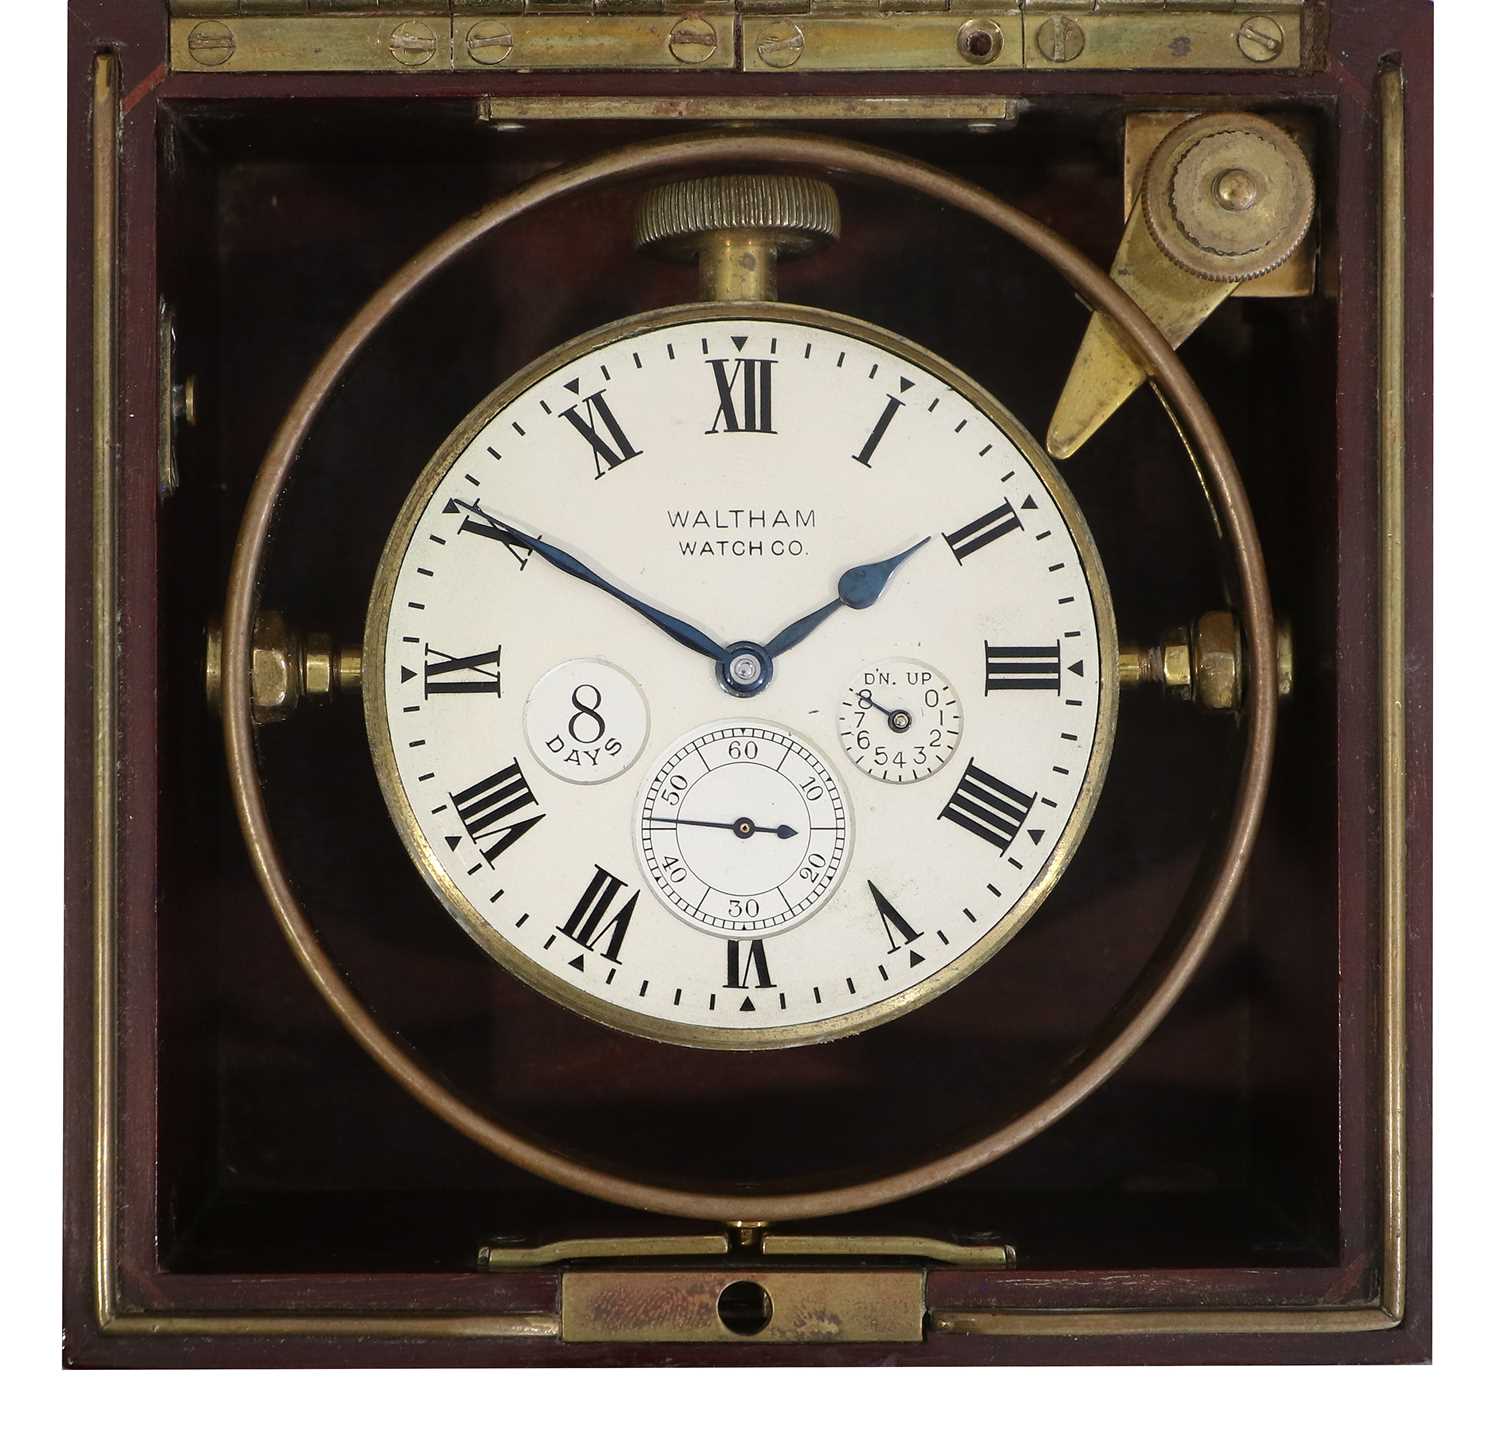 A Mahogany Eight Day Deck Watch, signed Waltham Watch Co, circa 1913, mahogany case with brass bound - Image 7 of 7